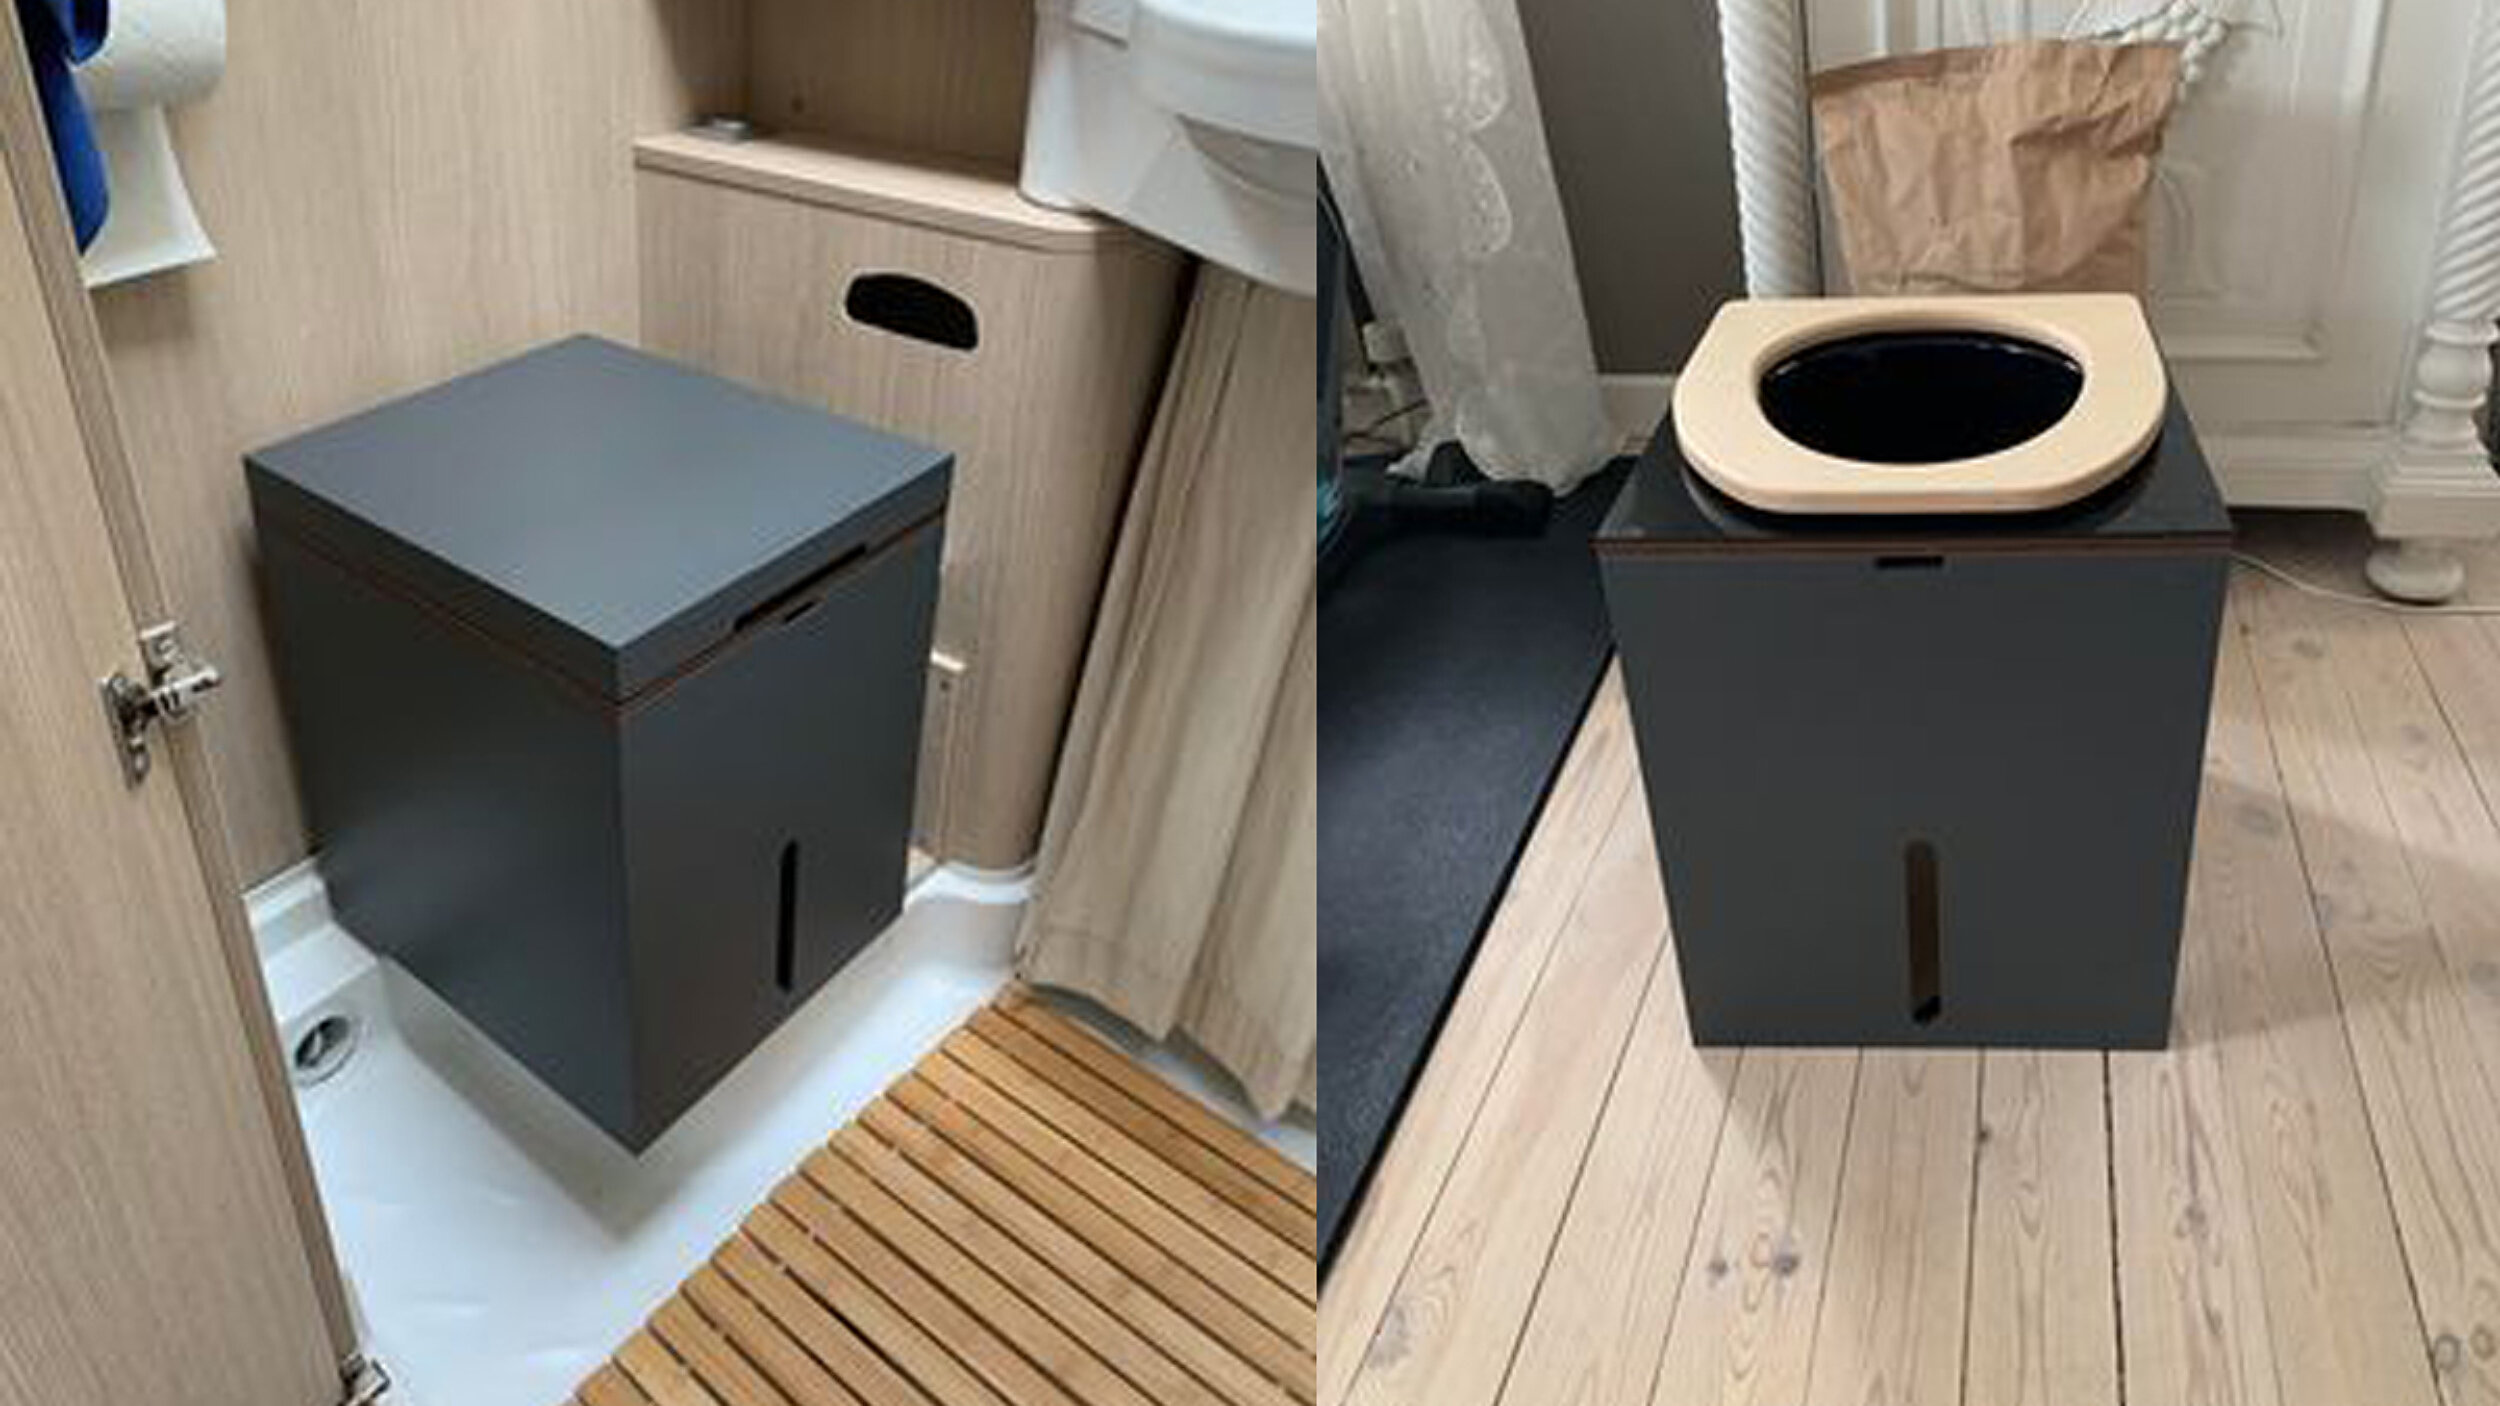 Our MiniLoo composting toilet with a black urine separator and individual paintwork